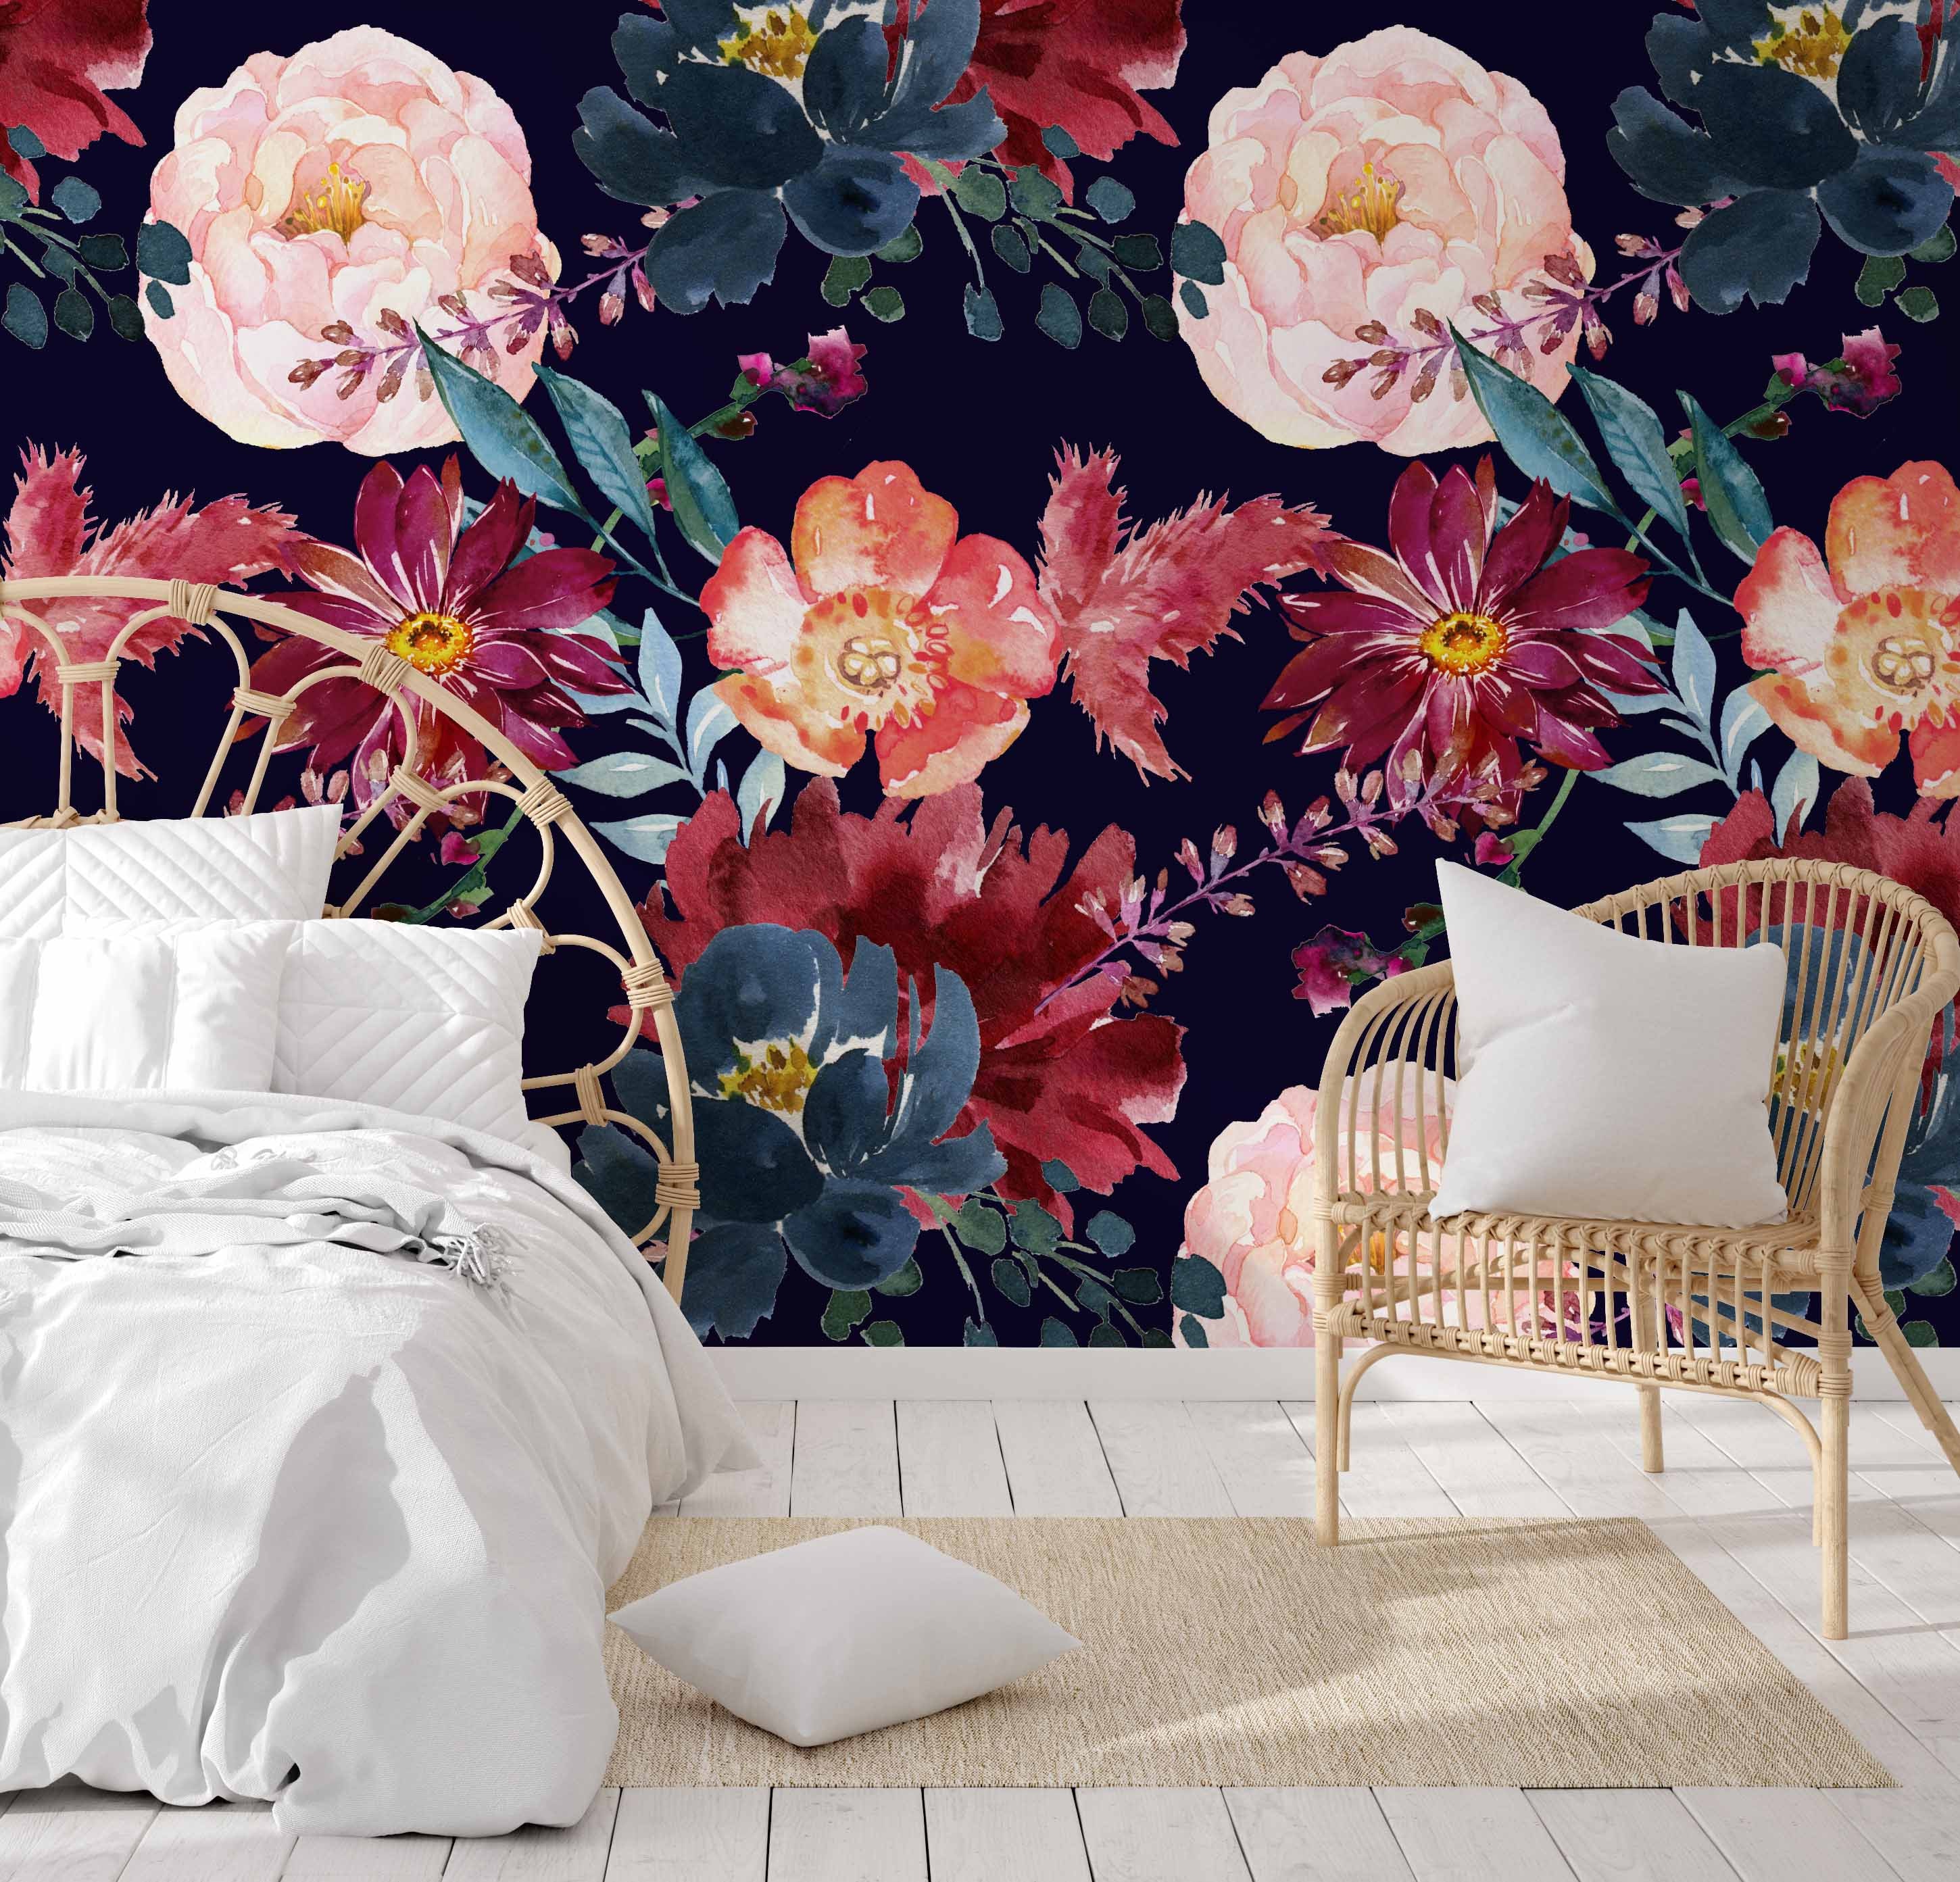 Blue and pink pattern on black background Bedroom Wallpaper  TenStickers